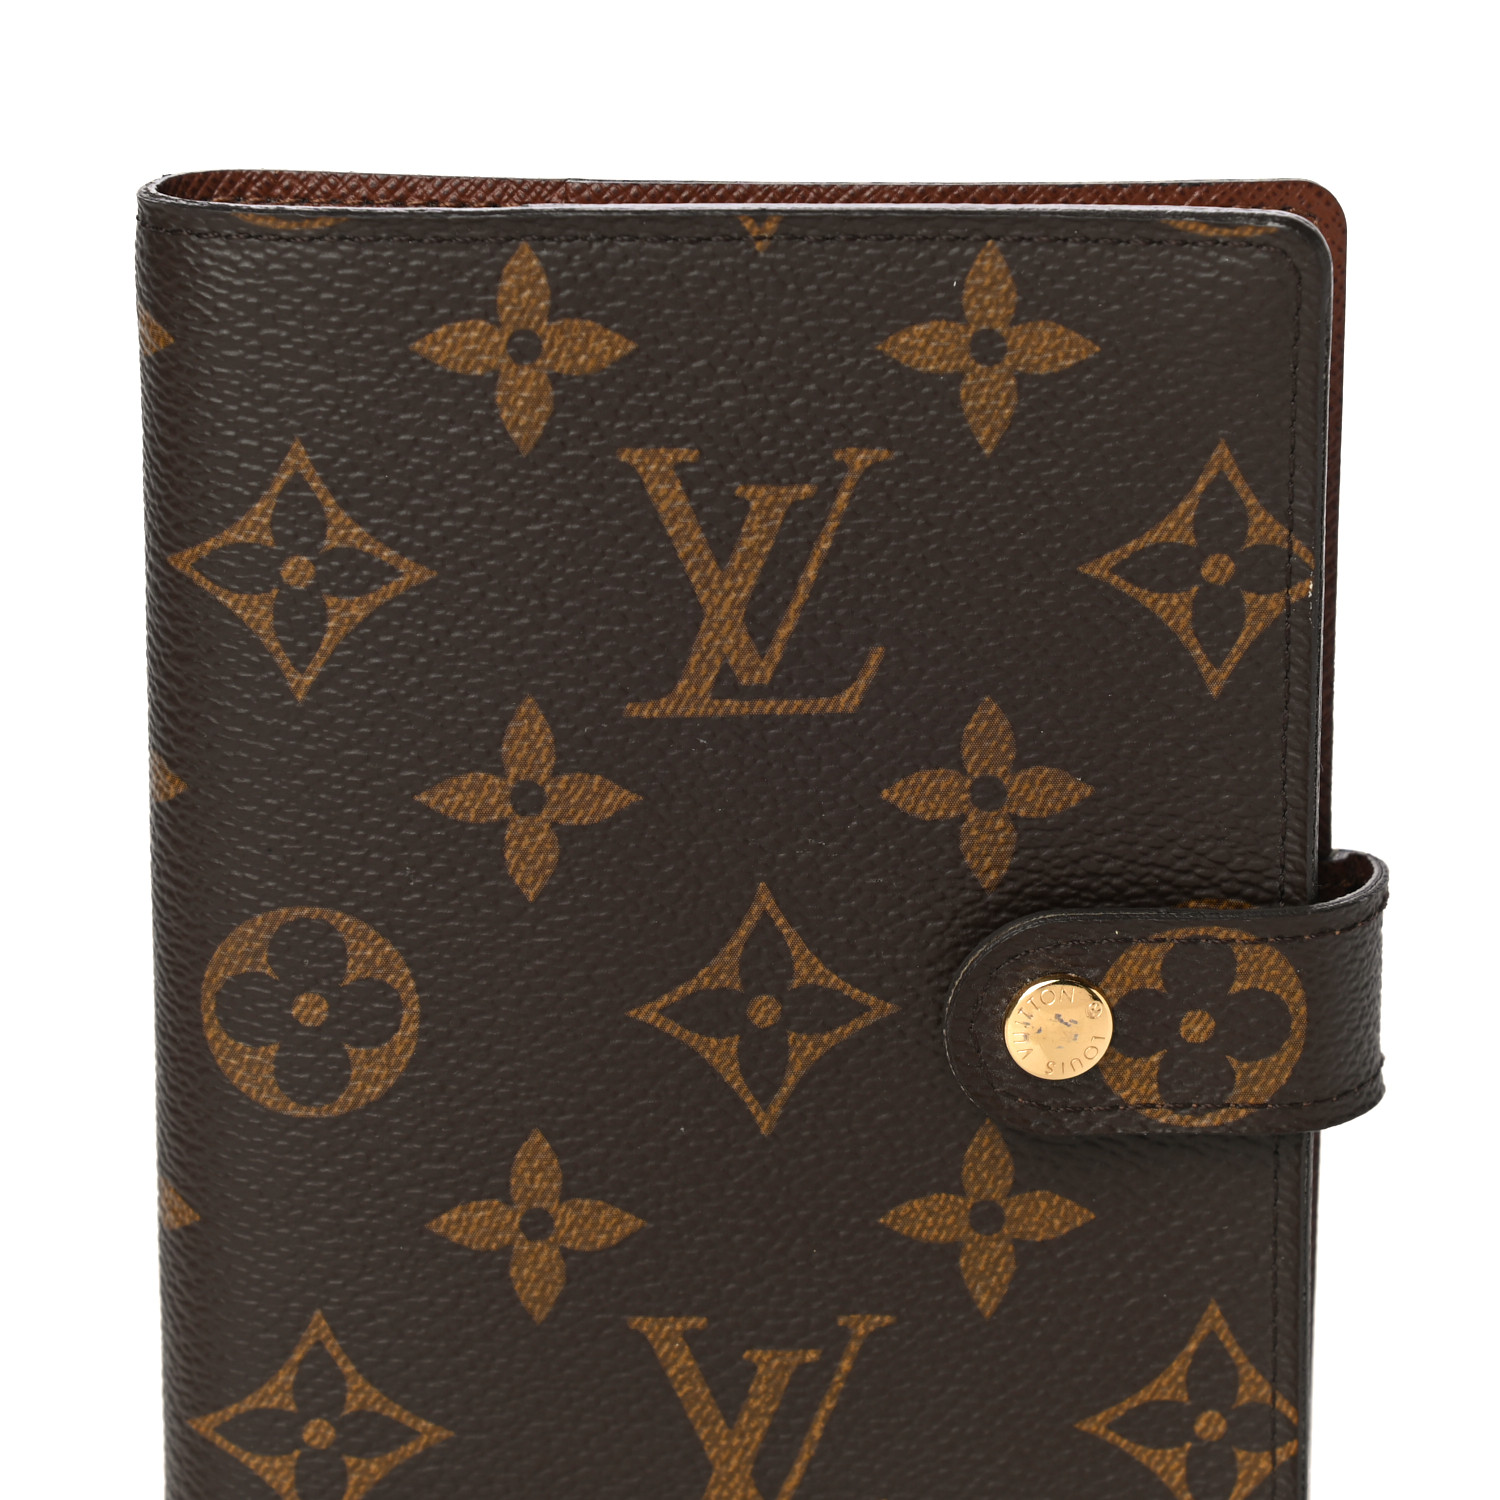 For nylig Øst Timor Inspektion LOUIS VUITTON Monogram Small Ring Agenda Cover 867180 | FASHIONPHILE